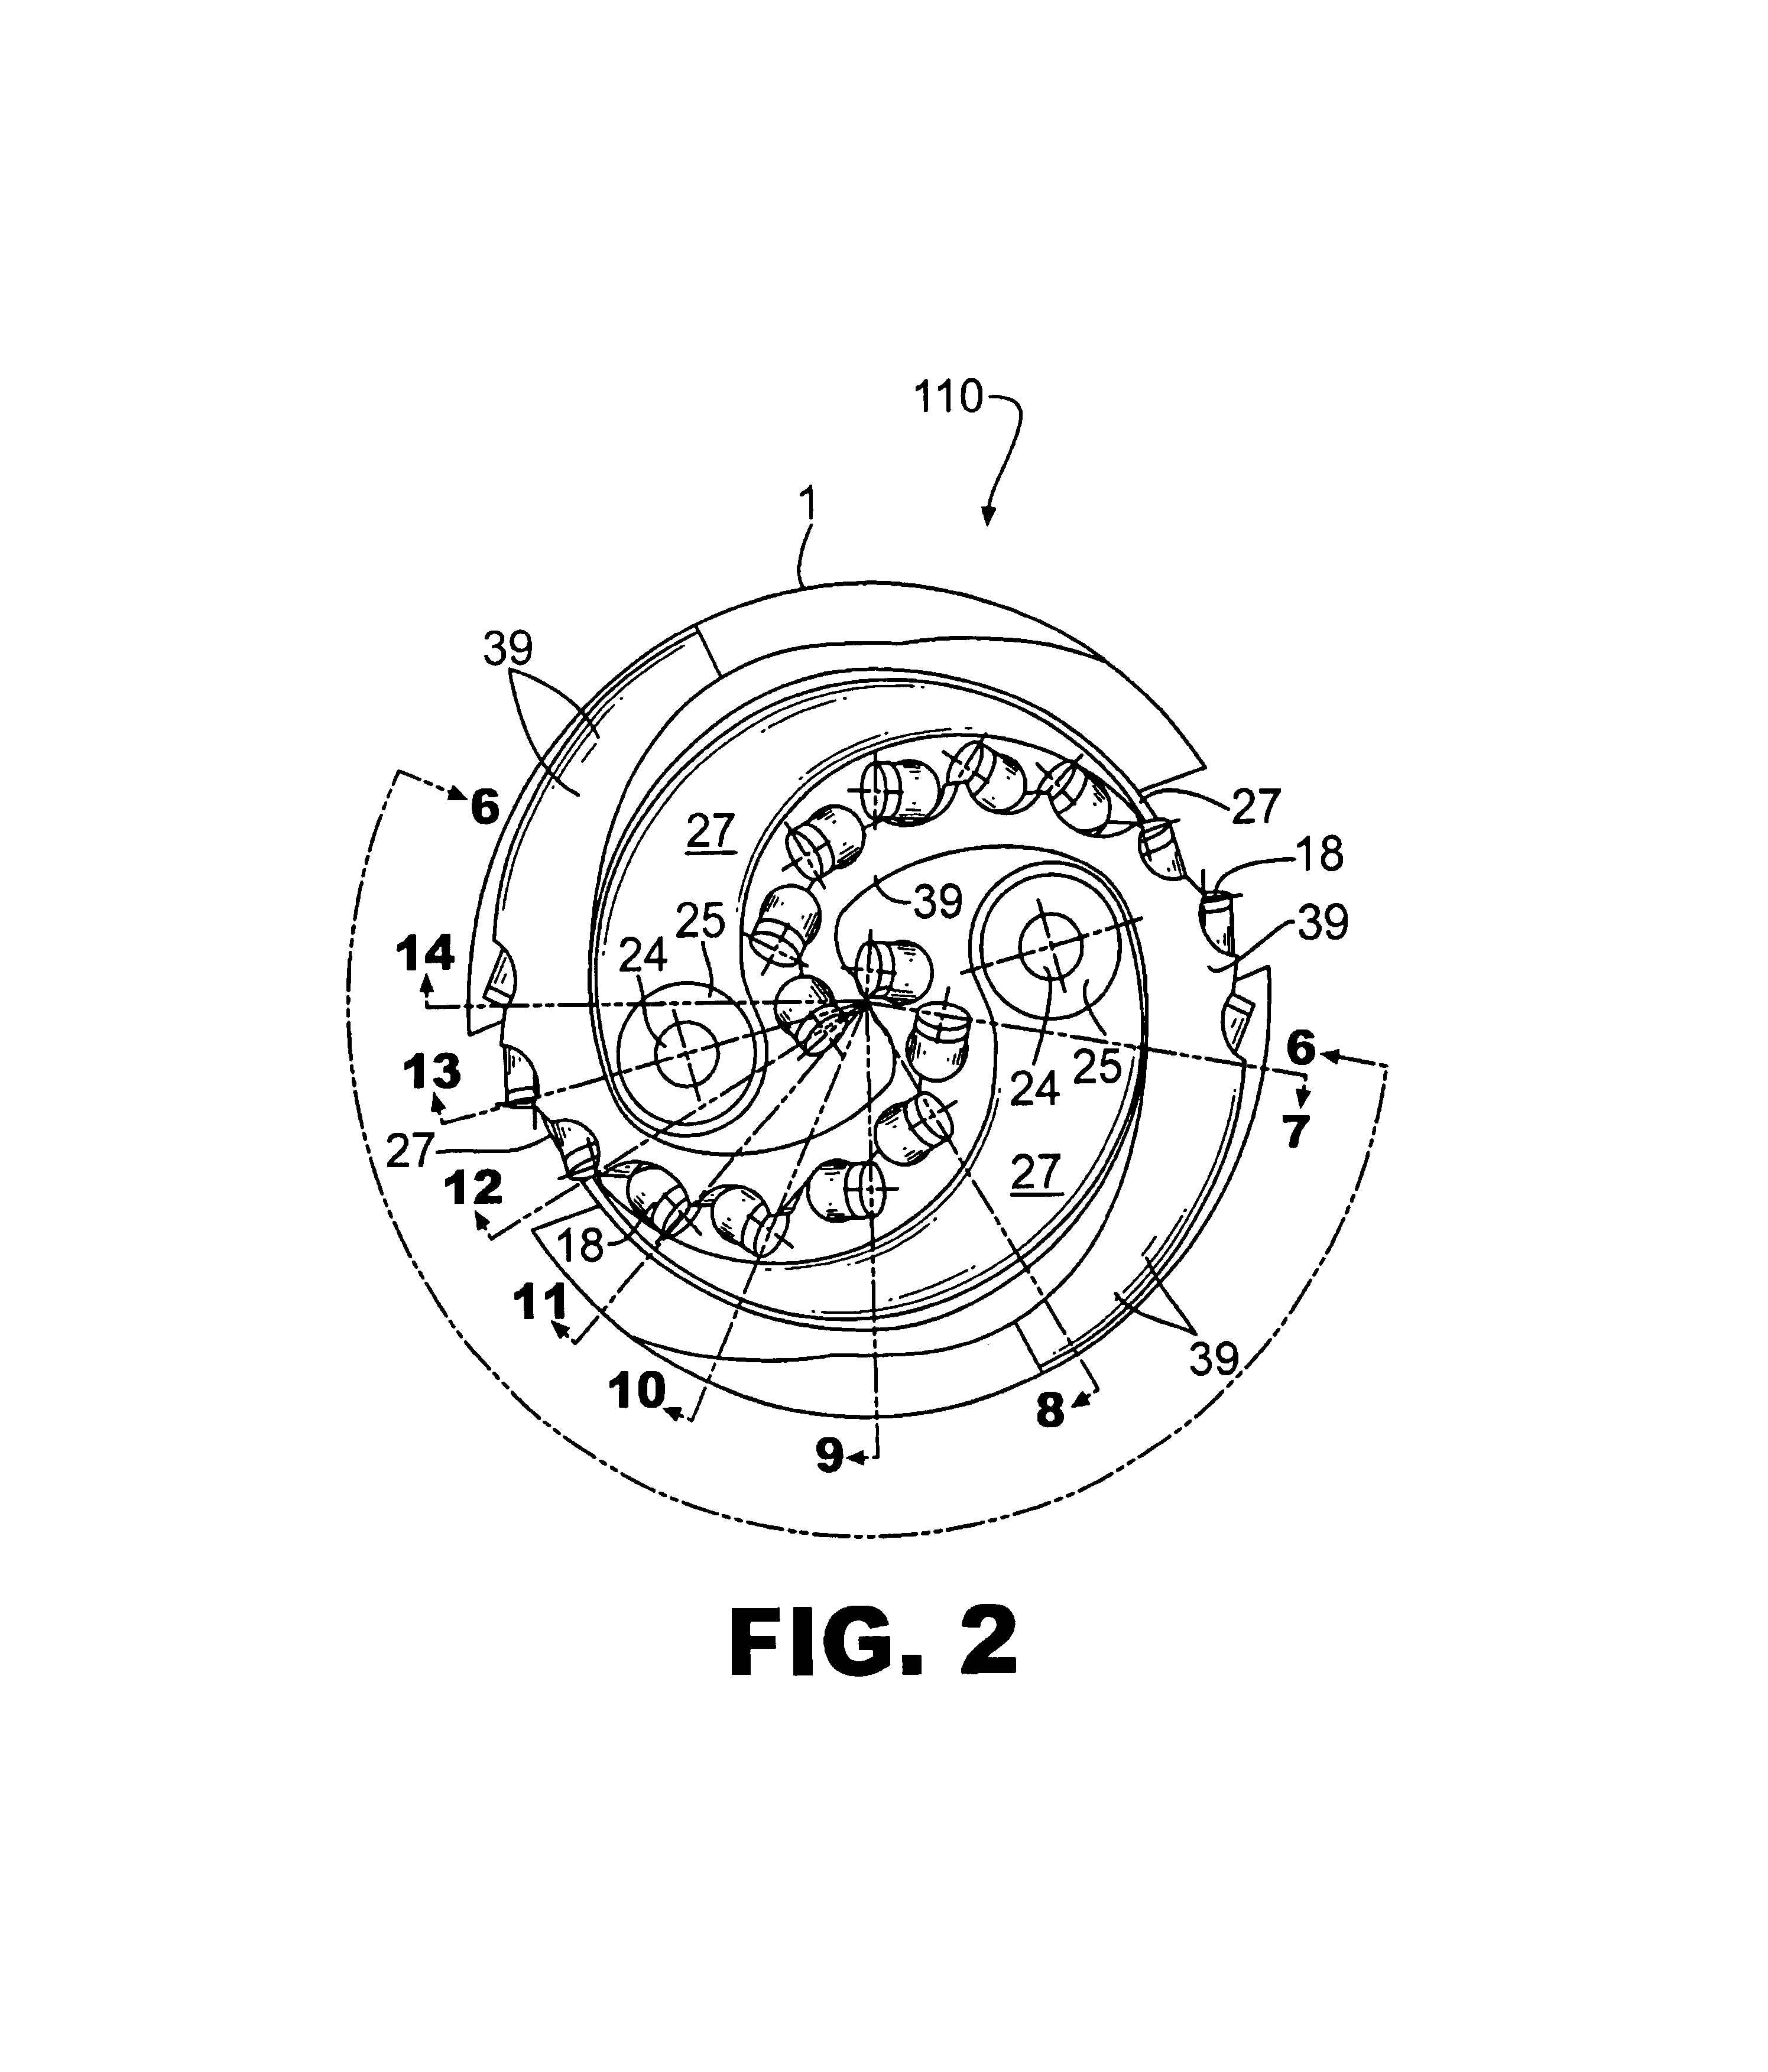 Stabilizing system and methods for a drill bit